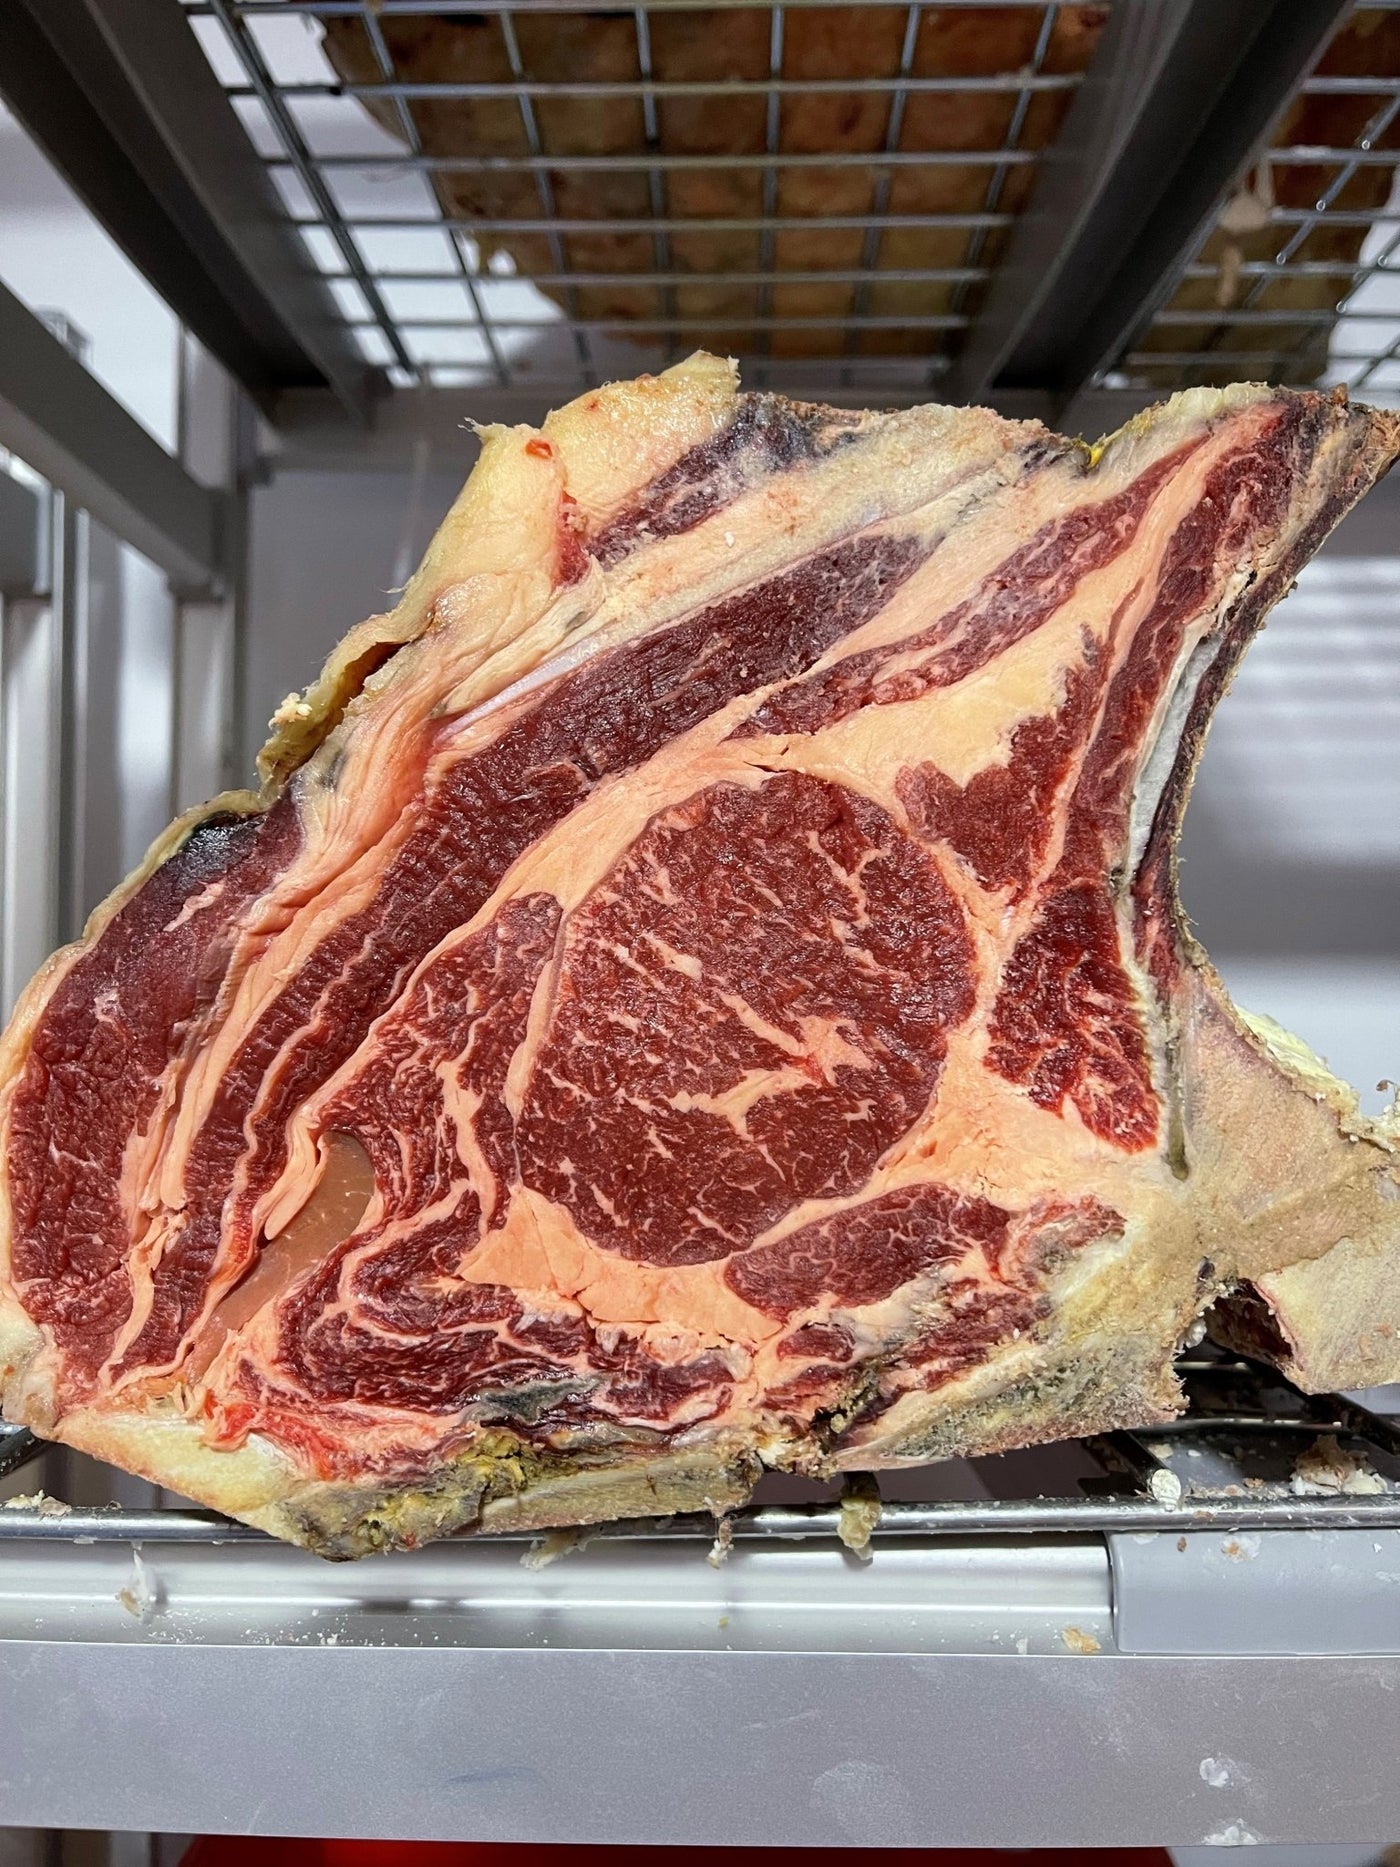 100 Day Dry-Aged Spanish Rubia Gallega - Thomas Joseph Butchery - Ethical Dry-Aged Meat The Best Steak UK Thomas Joseph Butchery